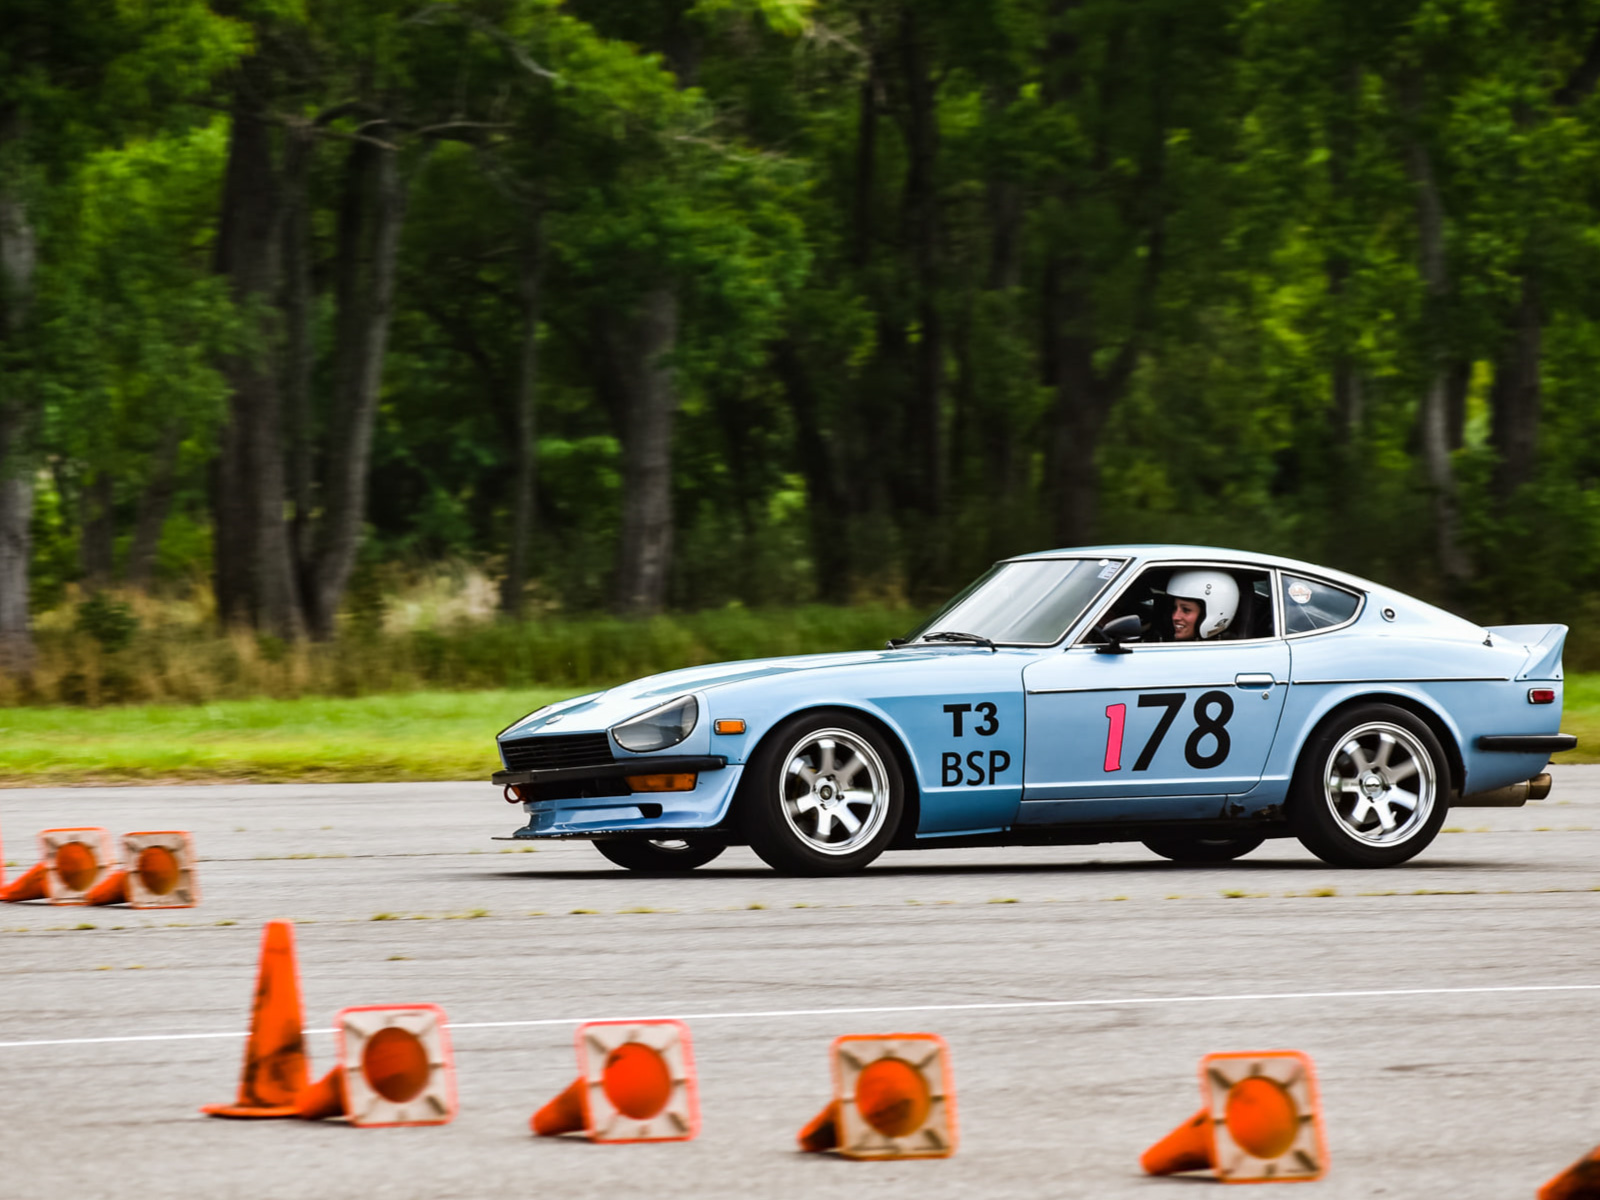 Autocross with the Buccaneer Region of the SCCA